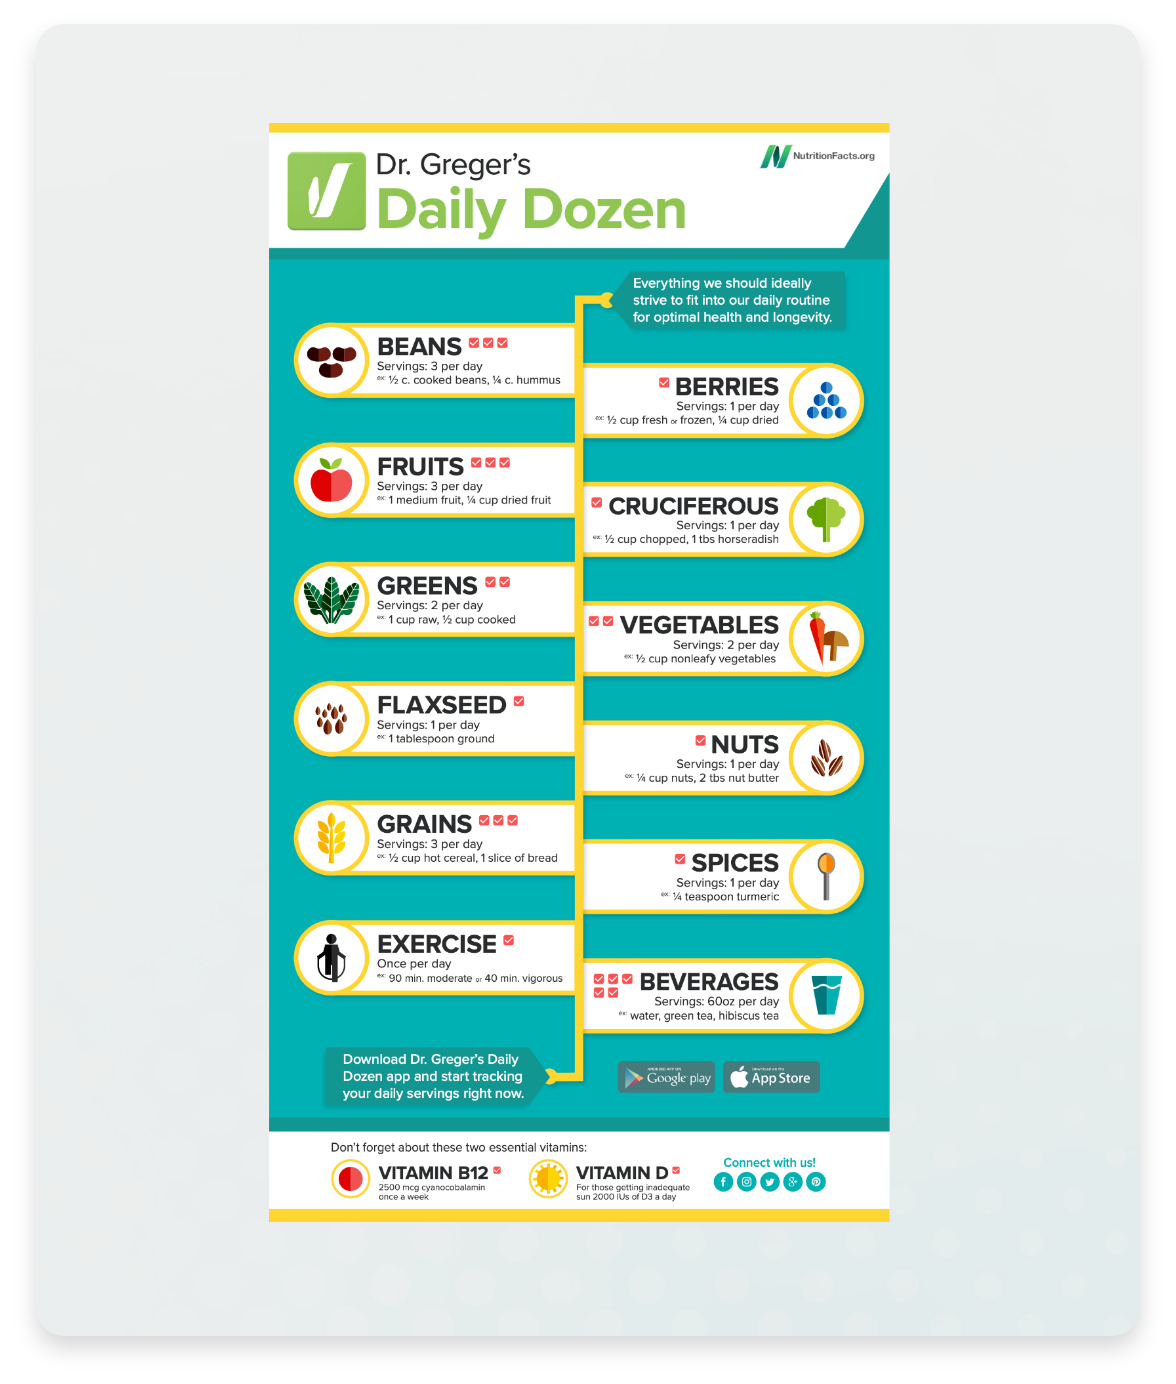 Picture of the Daily Dozen Infographic